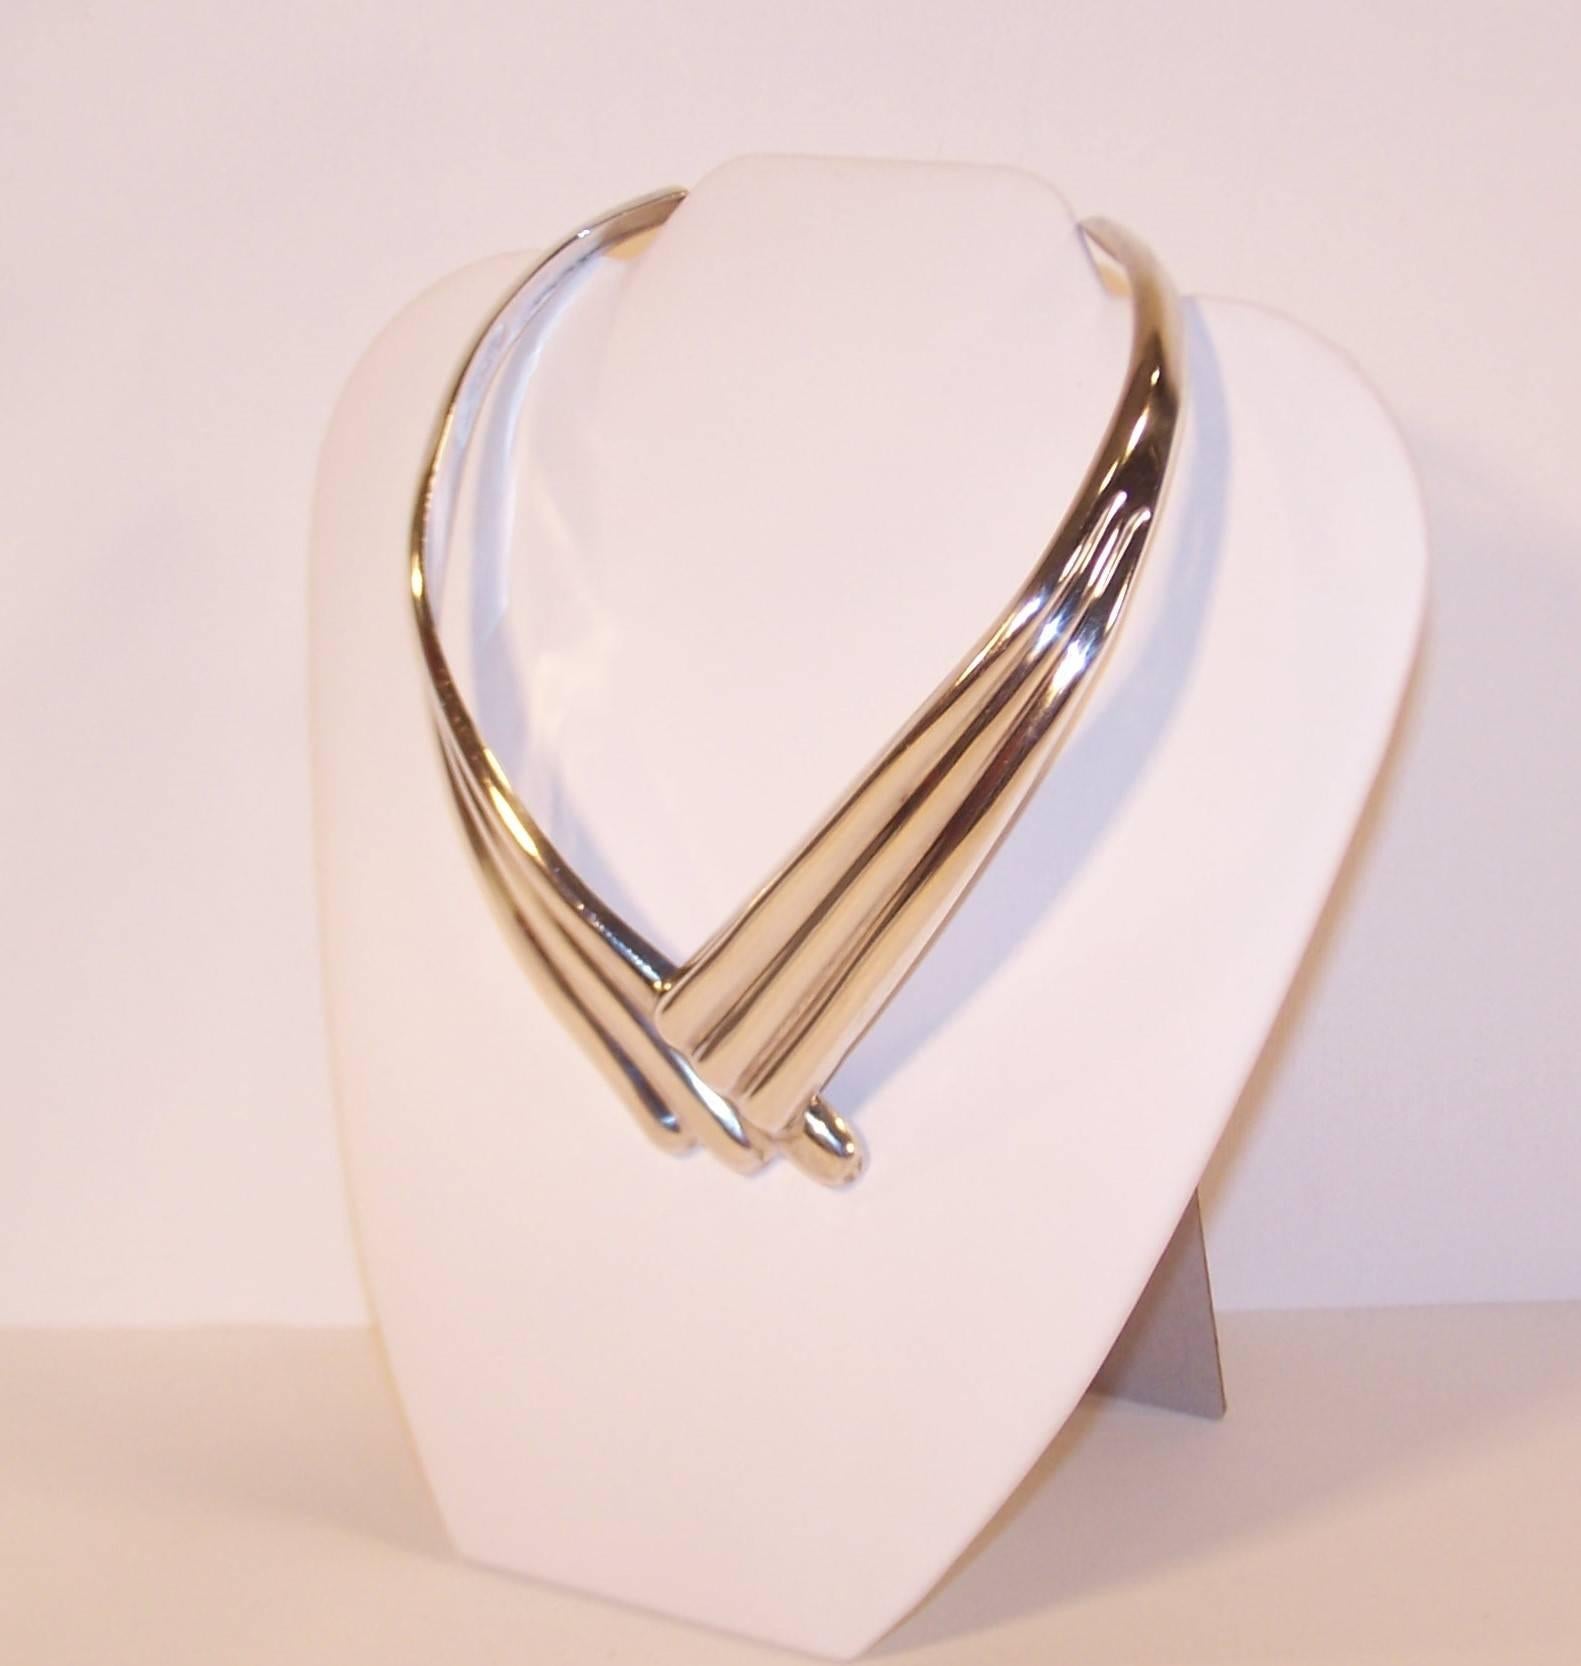 The 1970's vibe is strong with this Dulce Plateros Taxco Mexico sterling silver collar necklace.  Though it is a 1980's design, the puffed silver swoops are reminiscent of comet trails and conjure up images of Ziggy Stardust and Studio 54 fashions. 